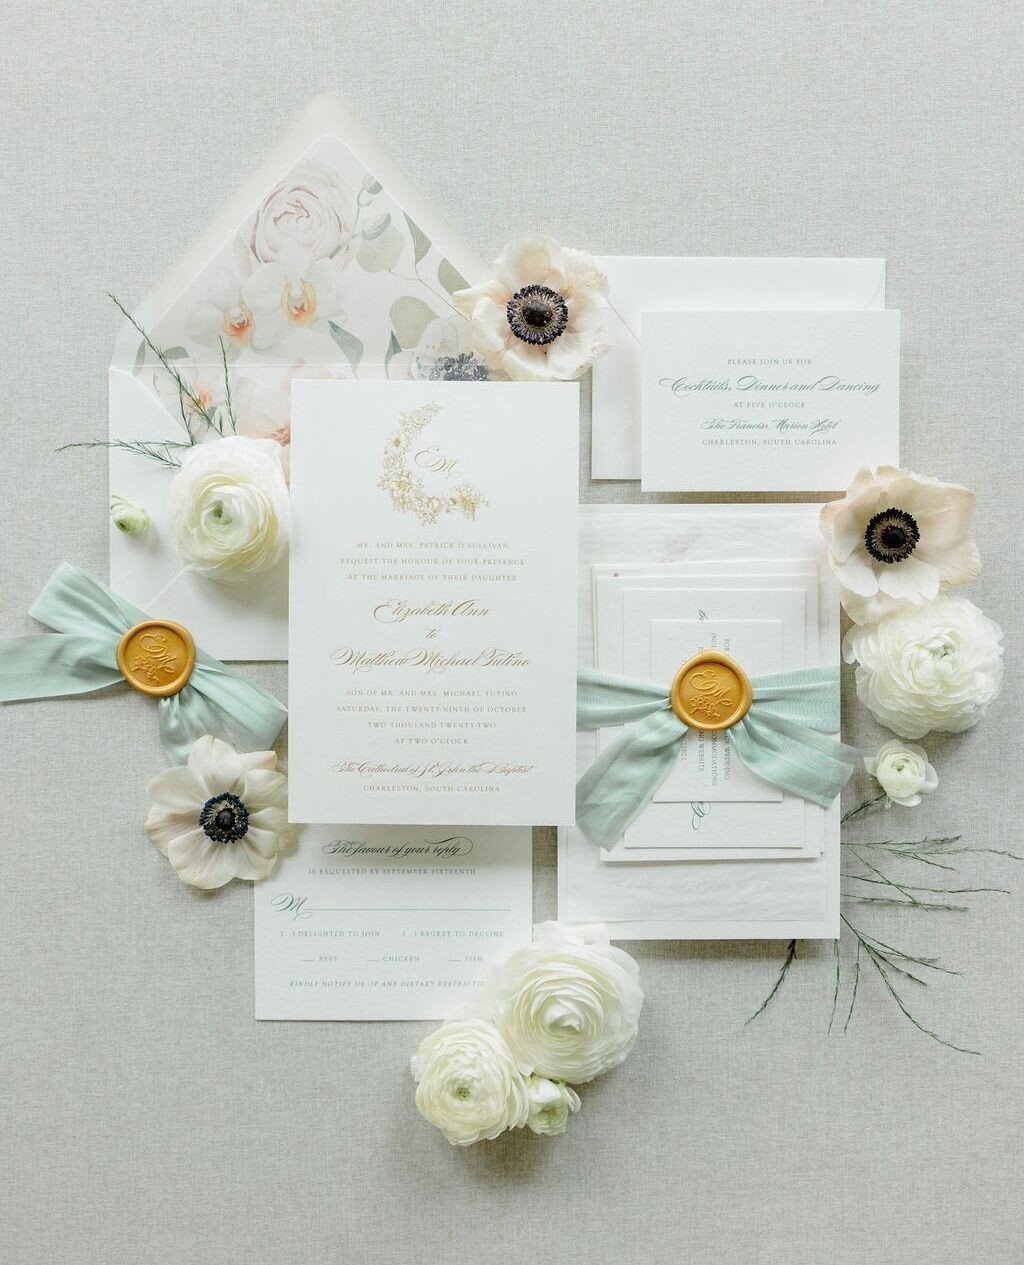 The fine print.⁠
This suite exudes the timeless charm of Charleston. The aspect of this design that I admire most is the floral wrap featuringE+M's initials, intricately adorned with Spanish moss in finely engraved gold print.⁠
⁠
Photo | @Kimberly.Hi